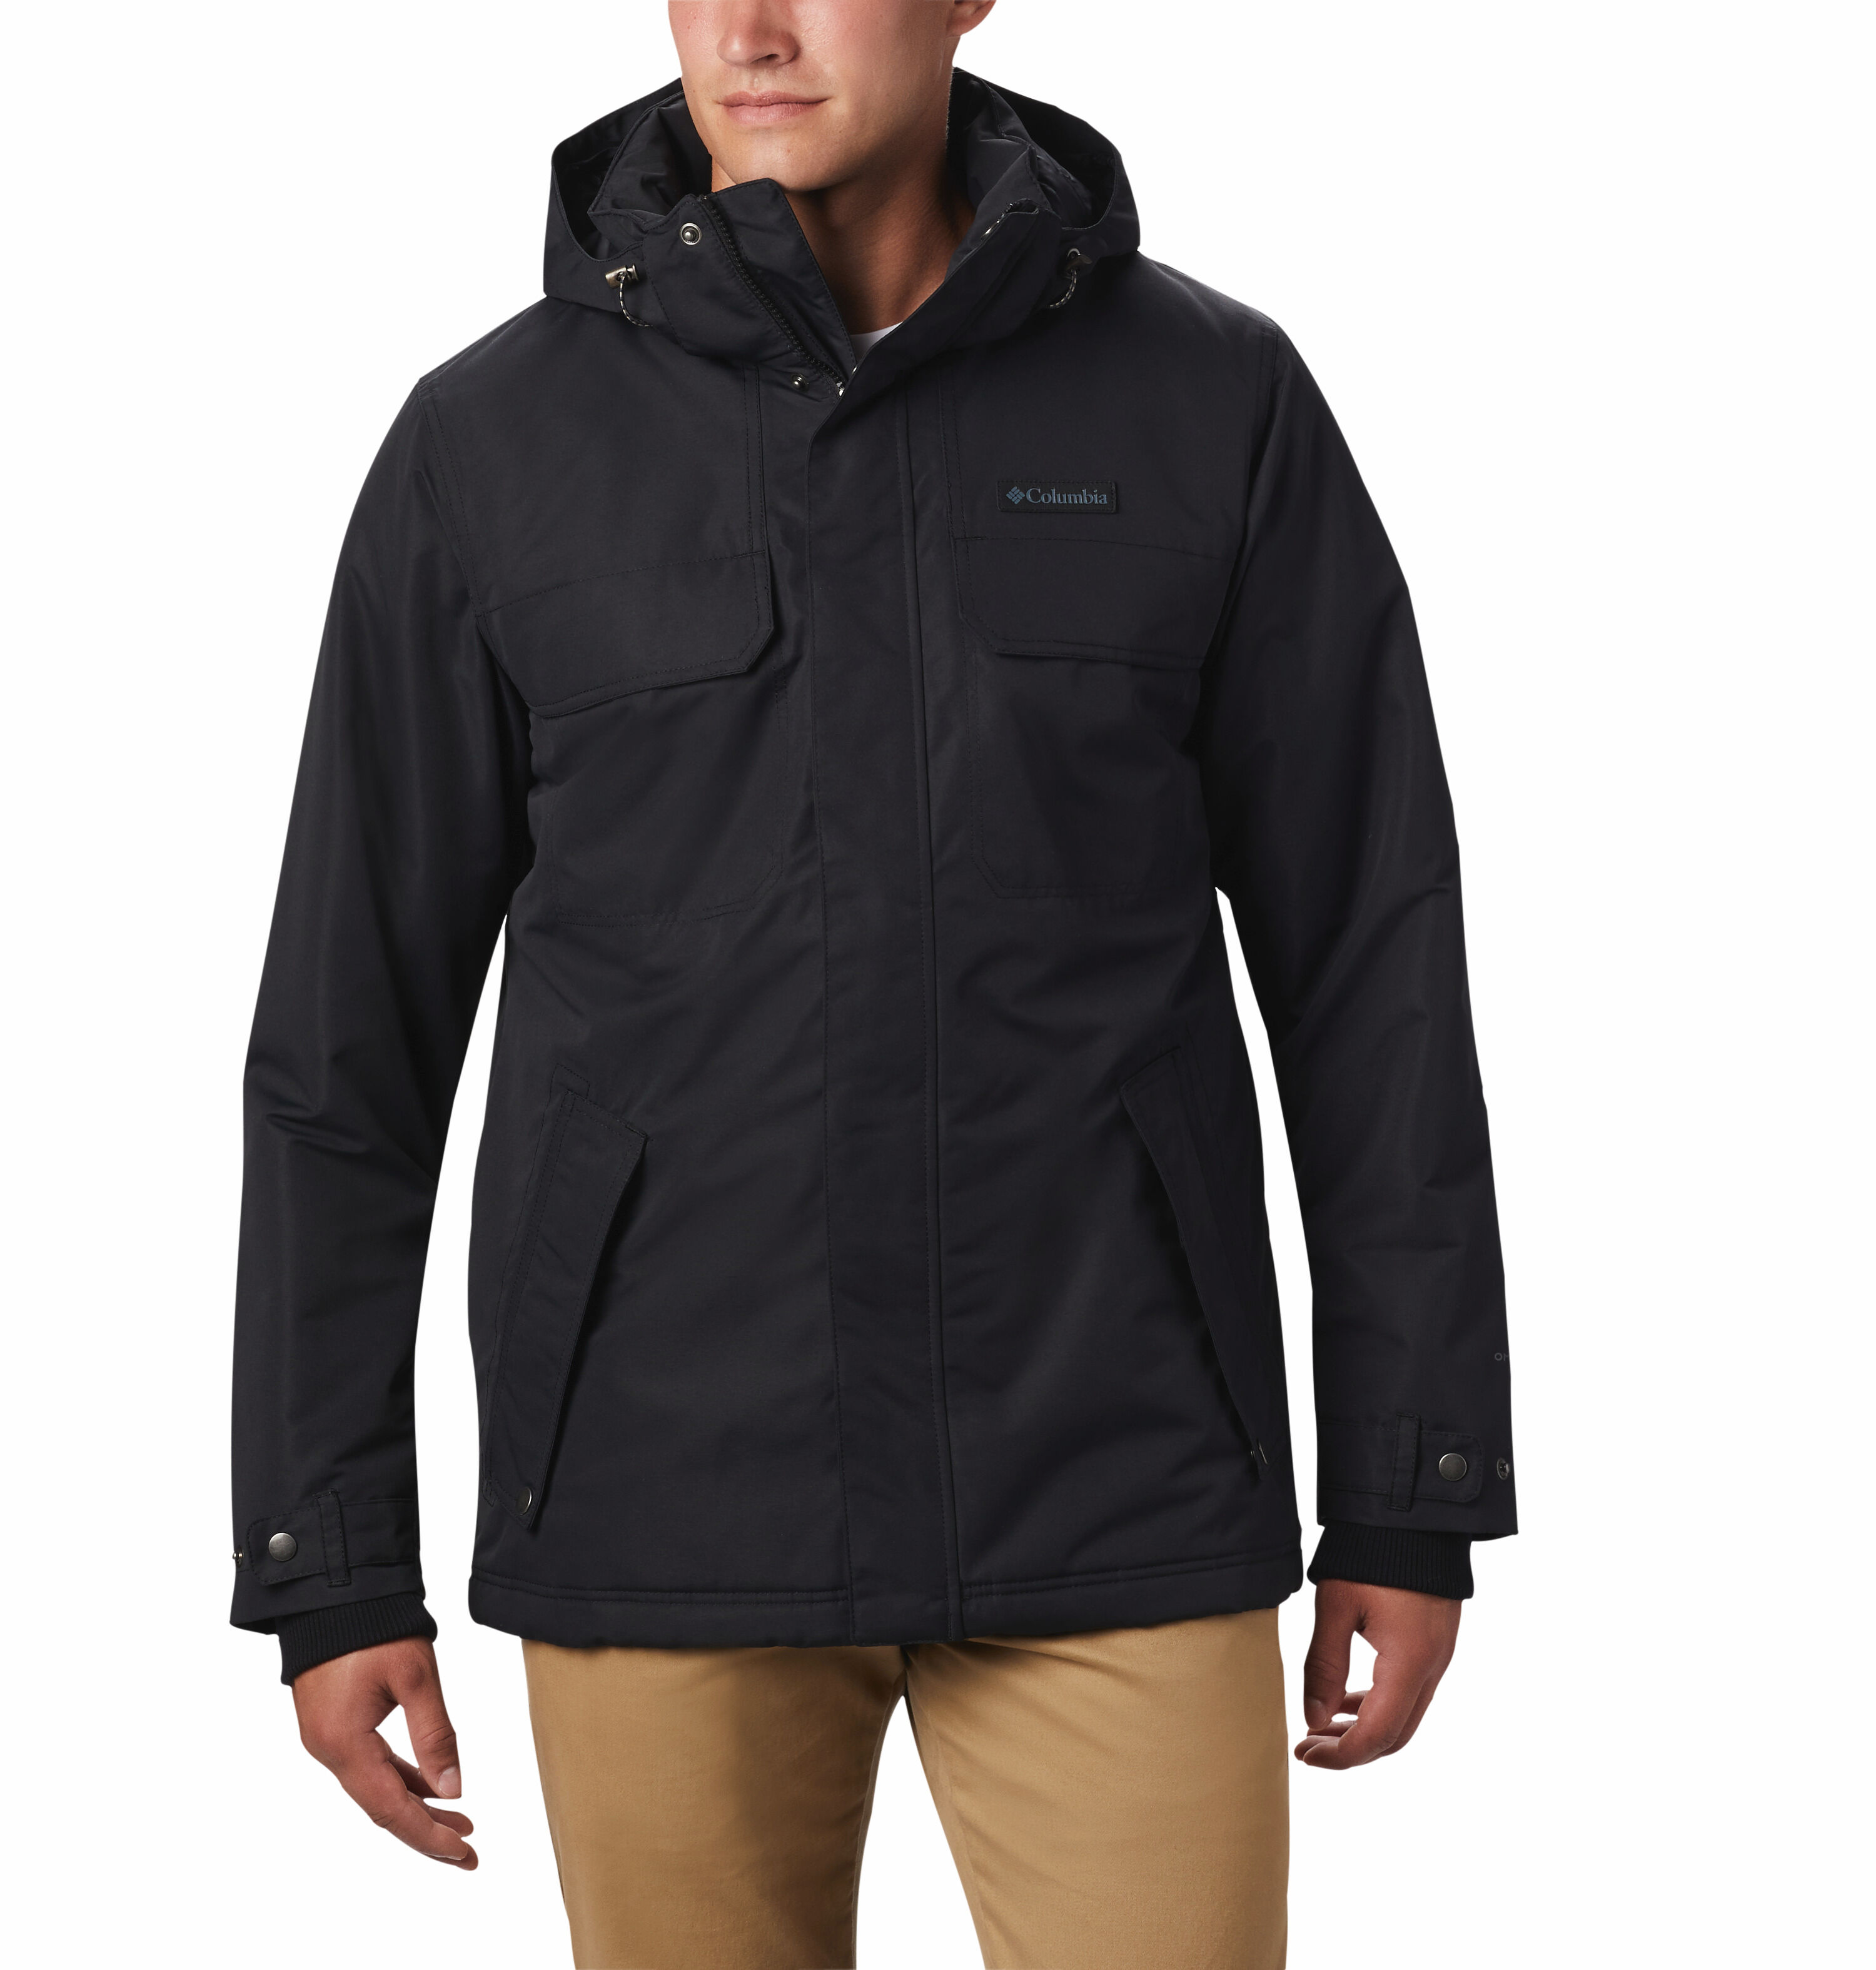 Columbia Rugged Path Jacket - Chaqueta impermeable - Hombre